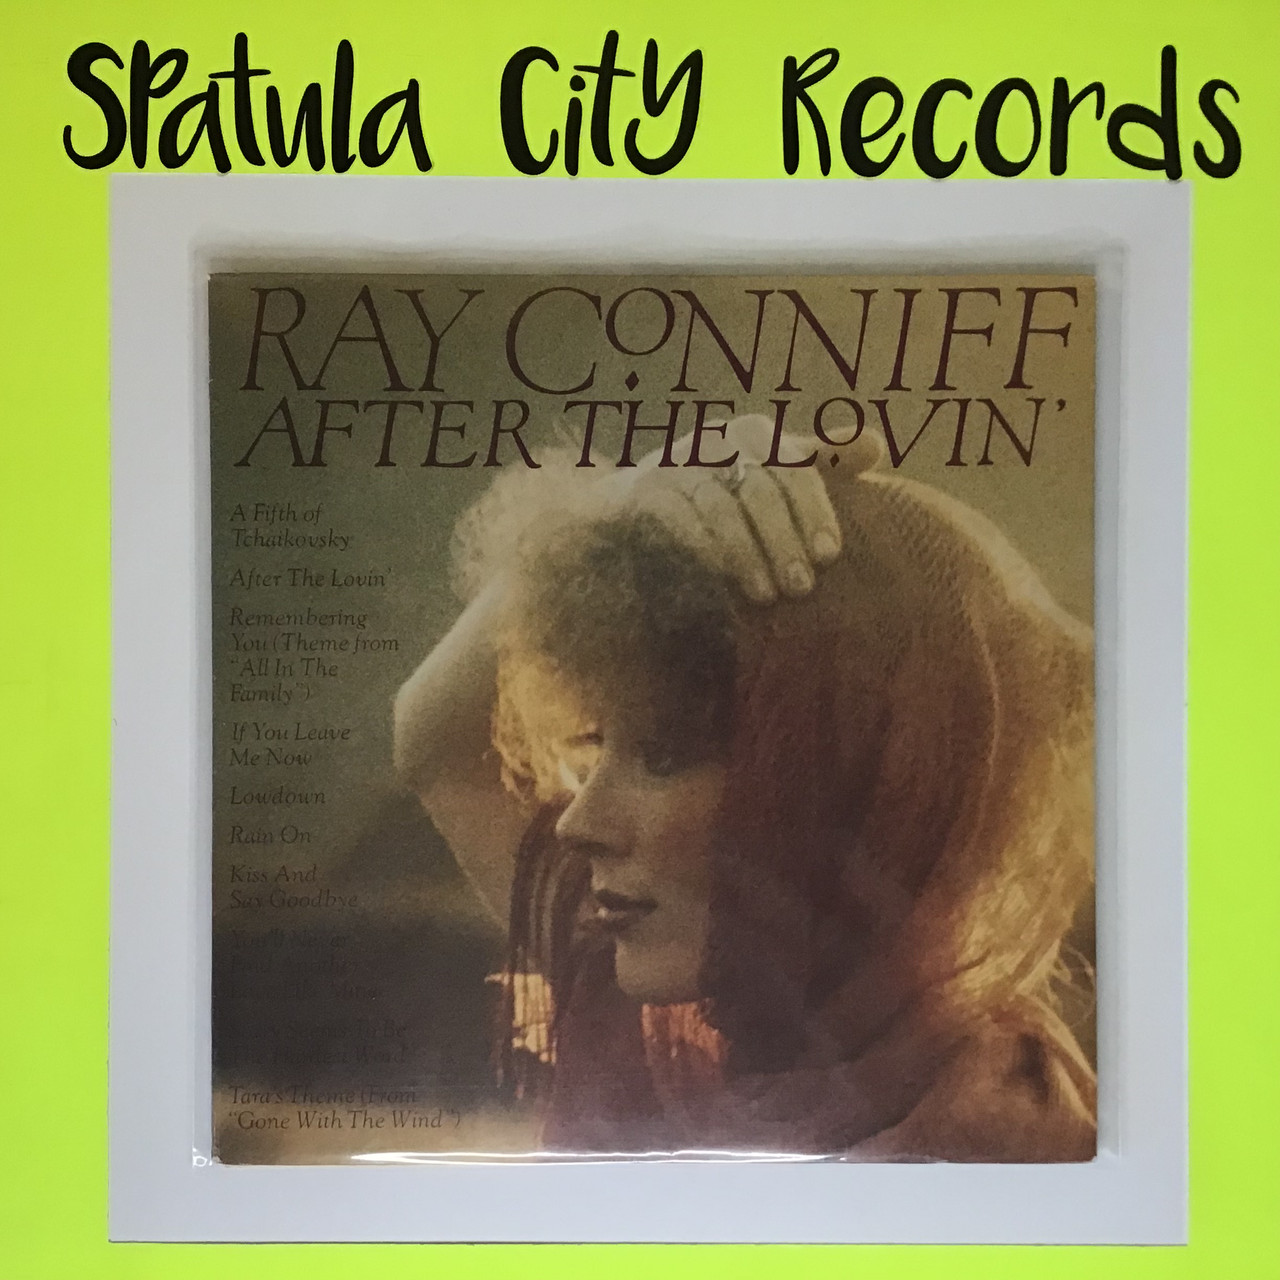 Ray Conniff - After The Lovin' - vinyl record LP